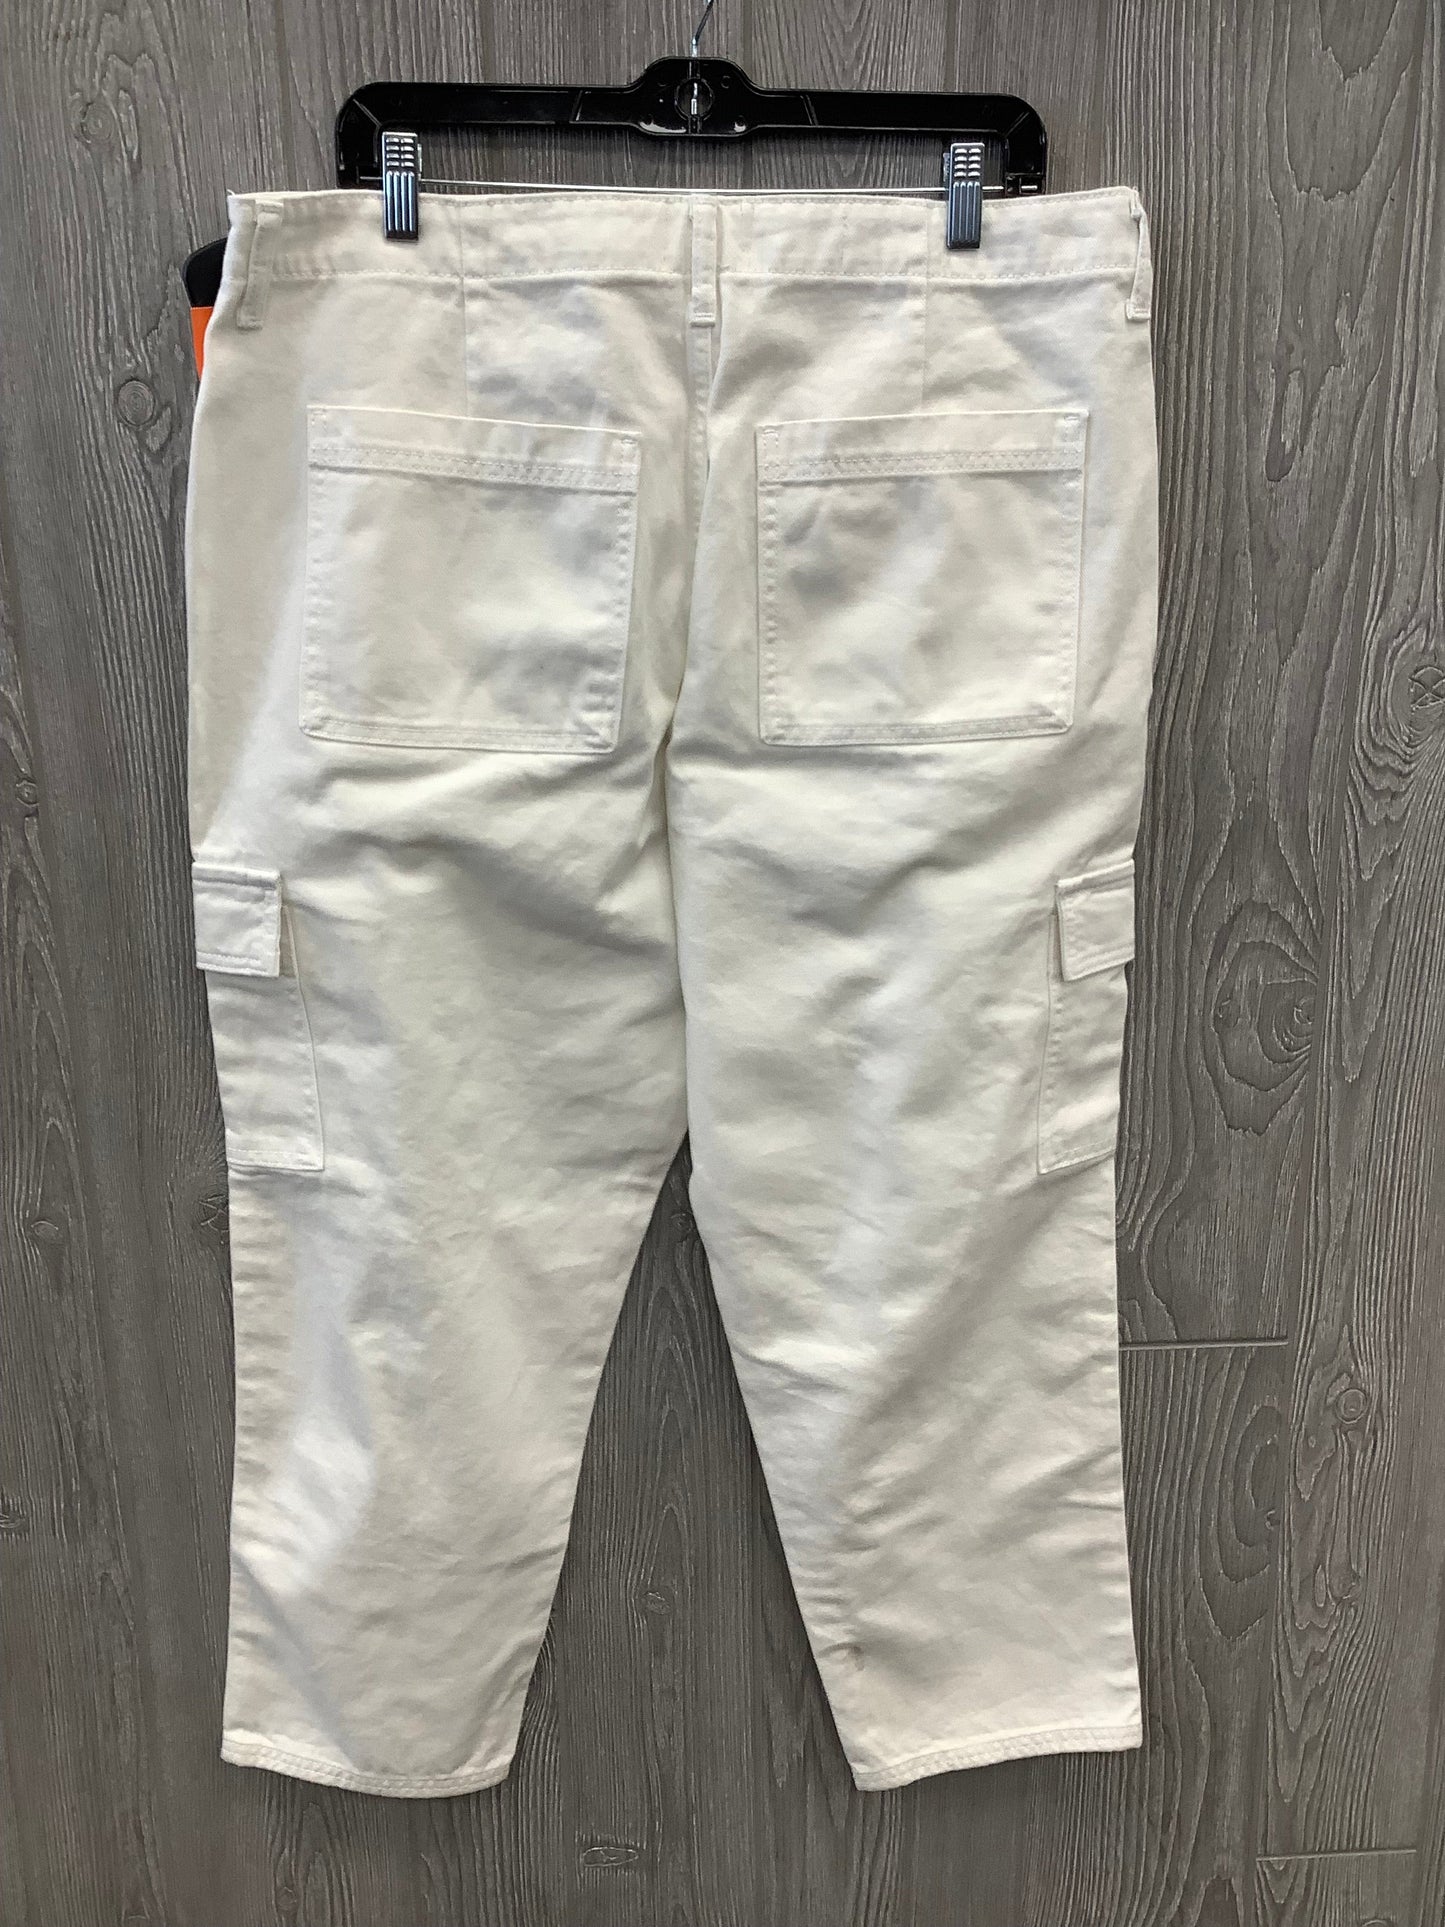 Jeans Relaxed/boyfriend By Universal Thread  Size: 14